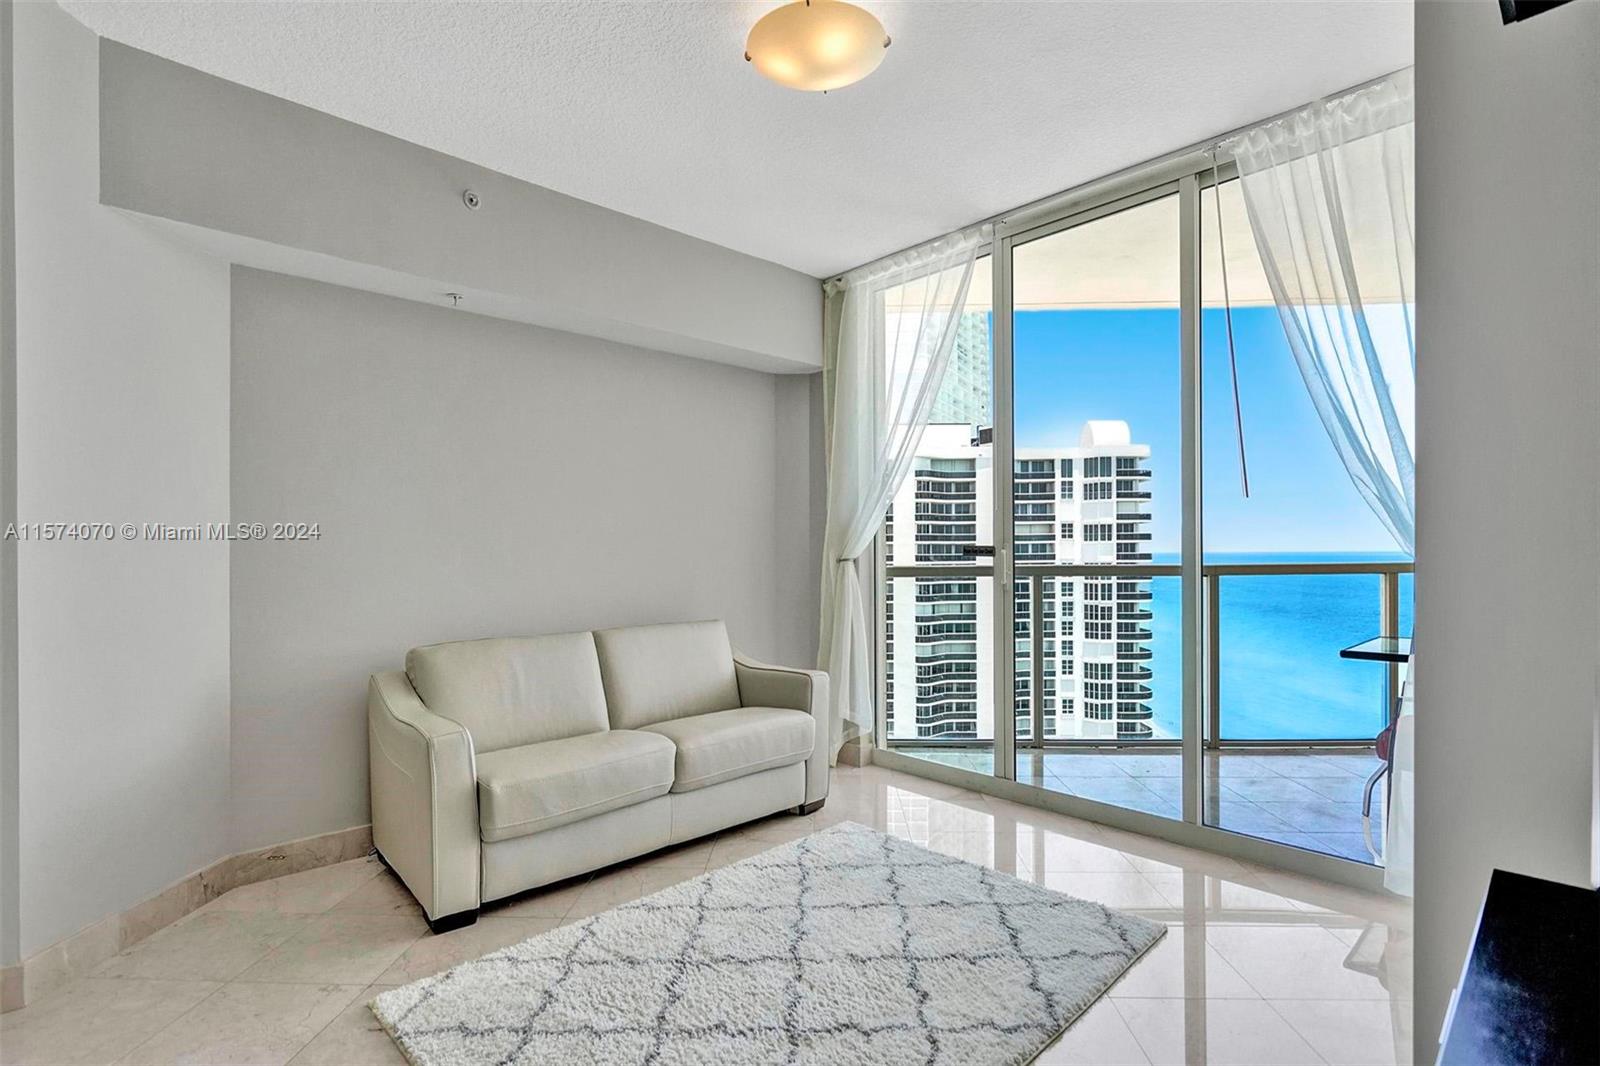 Furnished & spacious, #2405 offers an affordable long-term rental option with high floor ocean & city views that inspire. Inside, you'll find quality marble throughout, custom doors & fixtures, powder room & breakfast nook. Residents here love the fact of having the ocean below, but also the conveniences of this location. The Pier and restaurant are an amazing place to entertain - parking (valet), pool, gym, billiards, meeting rooms and many new friends await here at La Perla Ocean Residences.